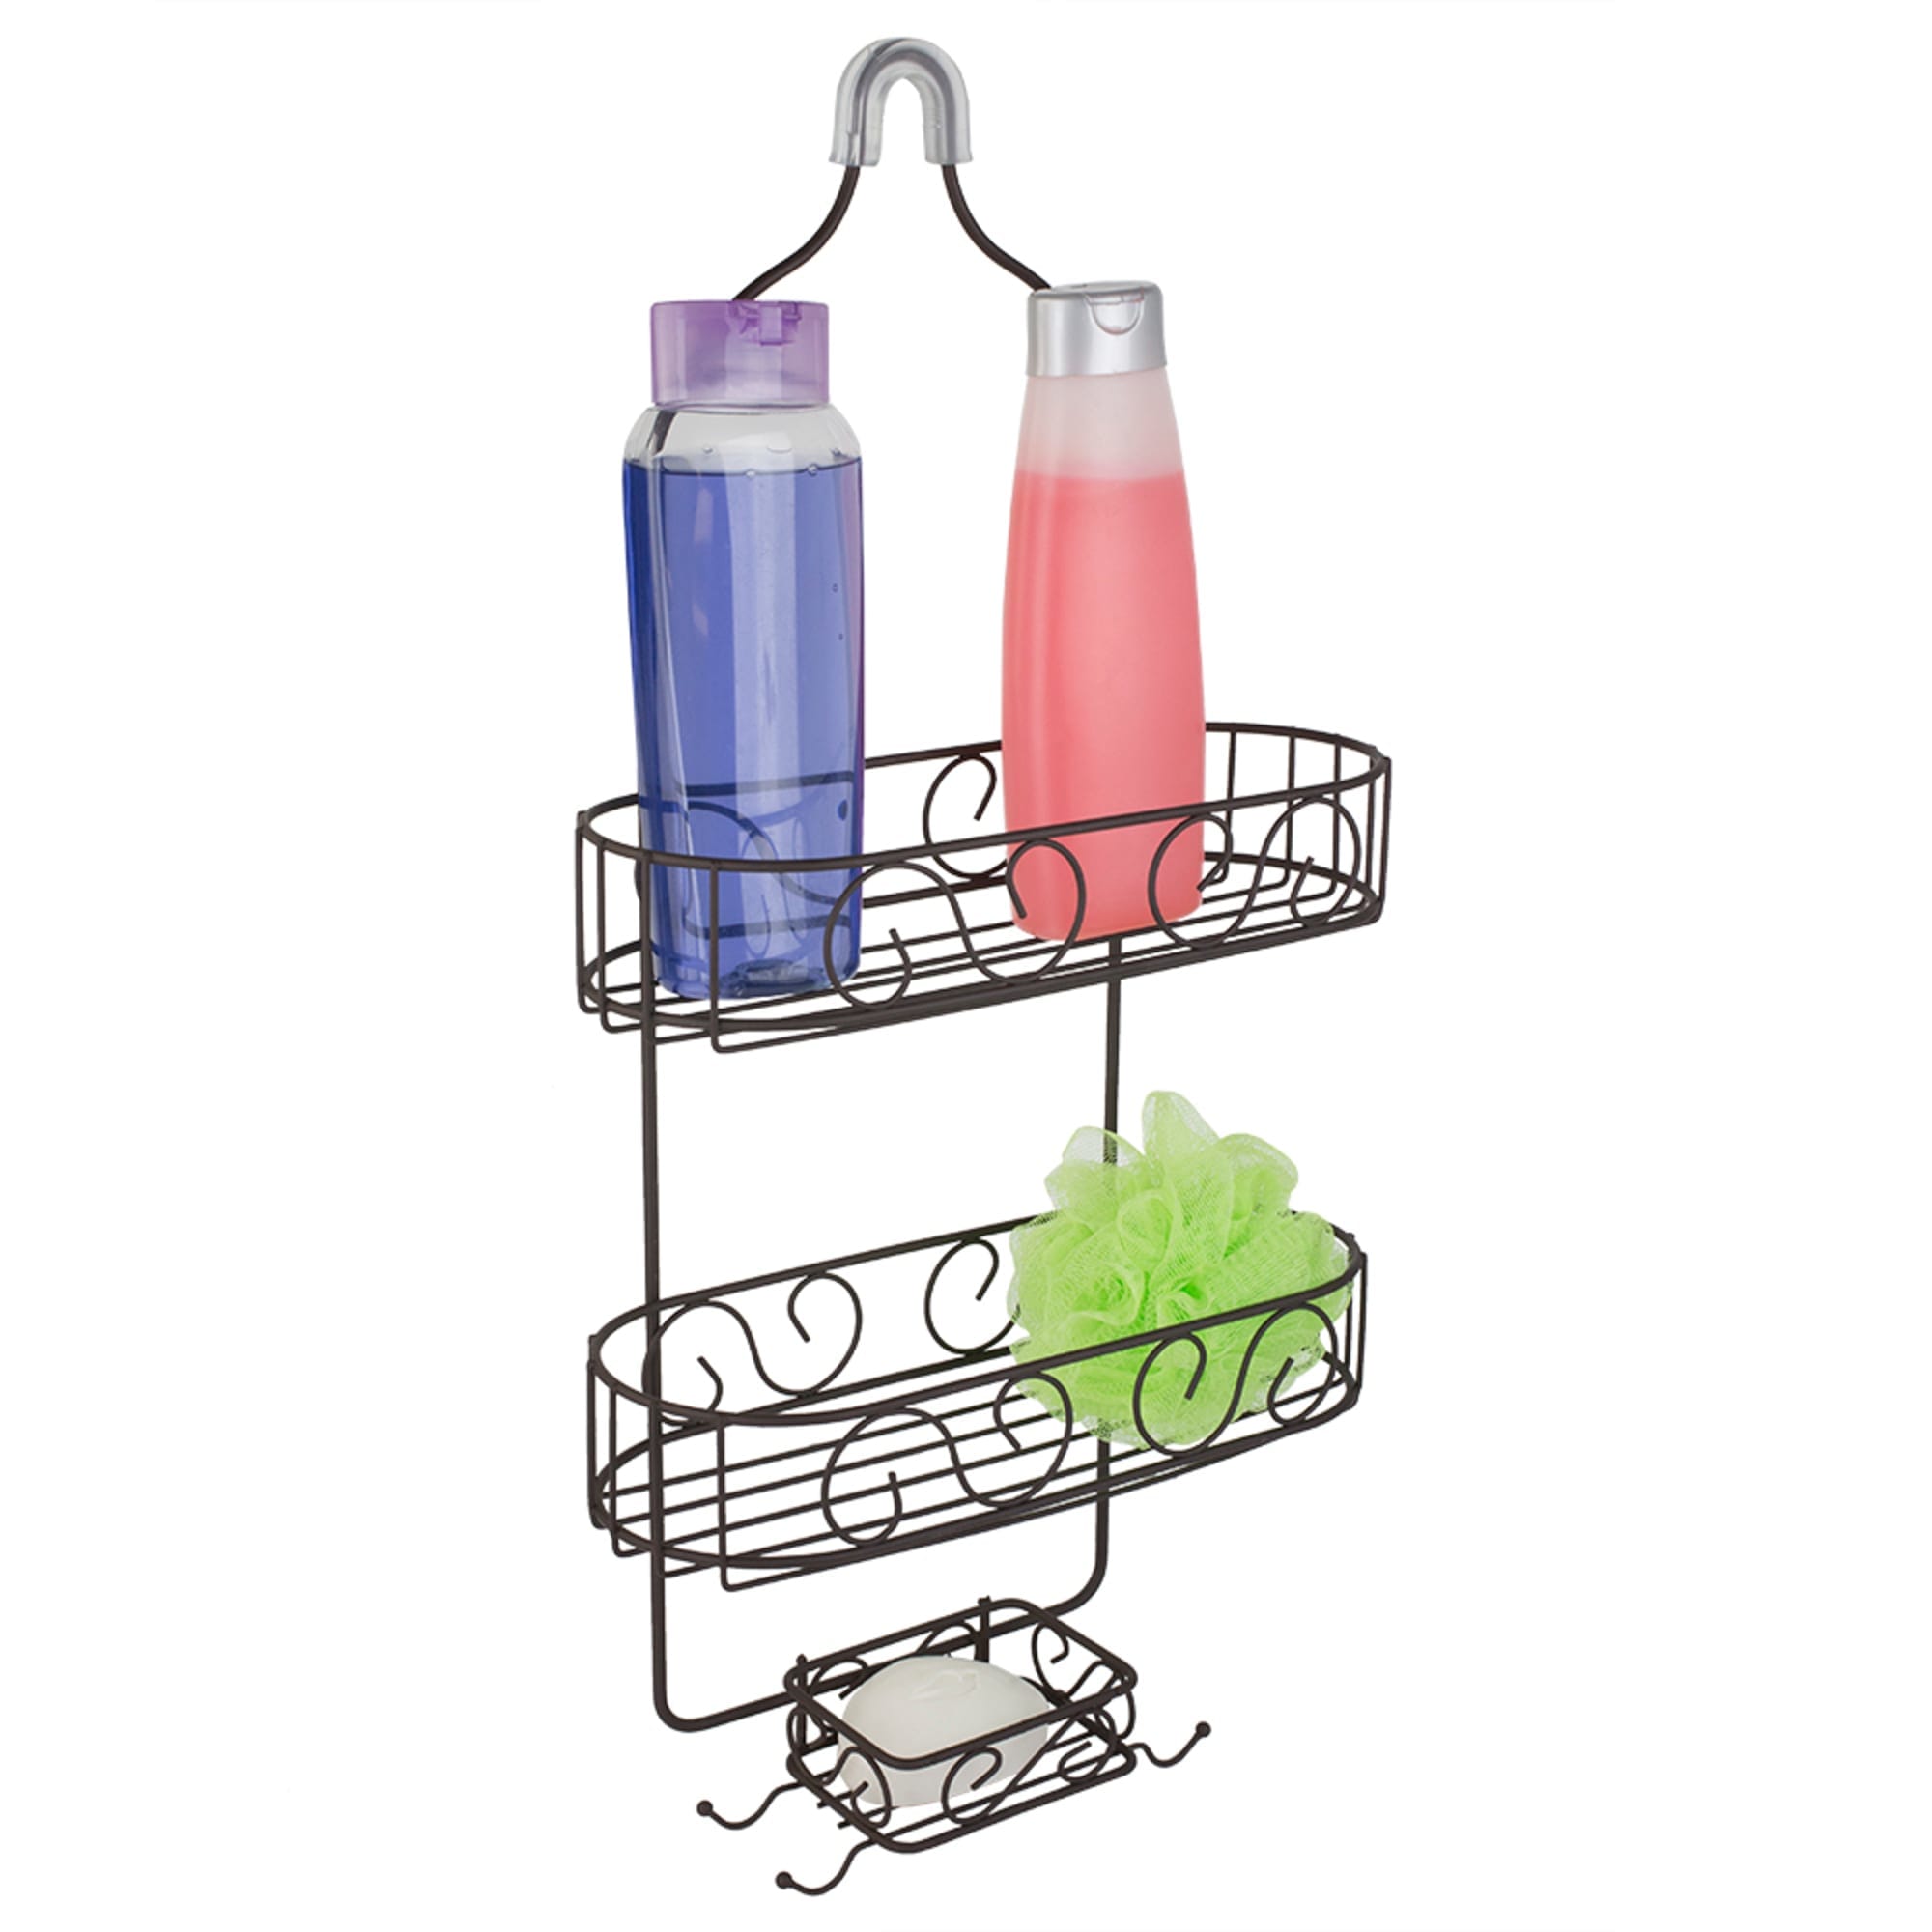 Home Basics Scroll Shower Caddy $15.00 EACH, CASE PACK OF 12